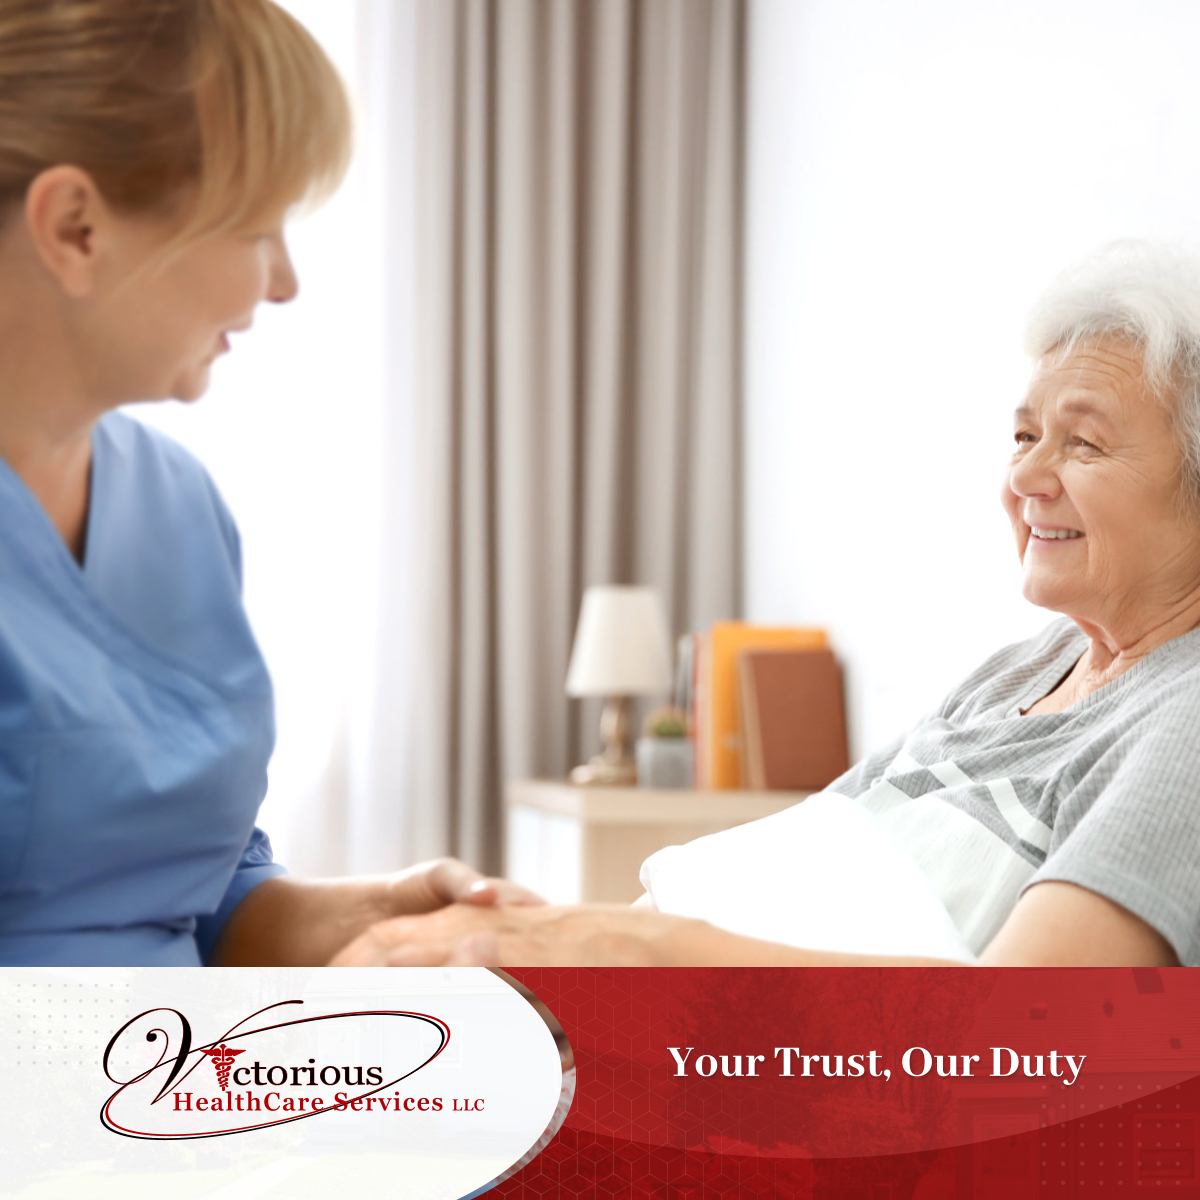 Reliable Care

We always strive to provide our clients with the most reliable care possible. When you receive care from us, you will always be assured of its quality.

#ReliableCare #VictoriousHealthcareServicesLLC